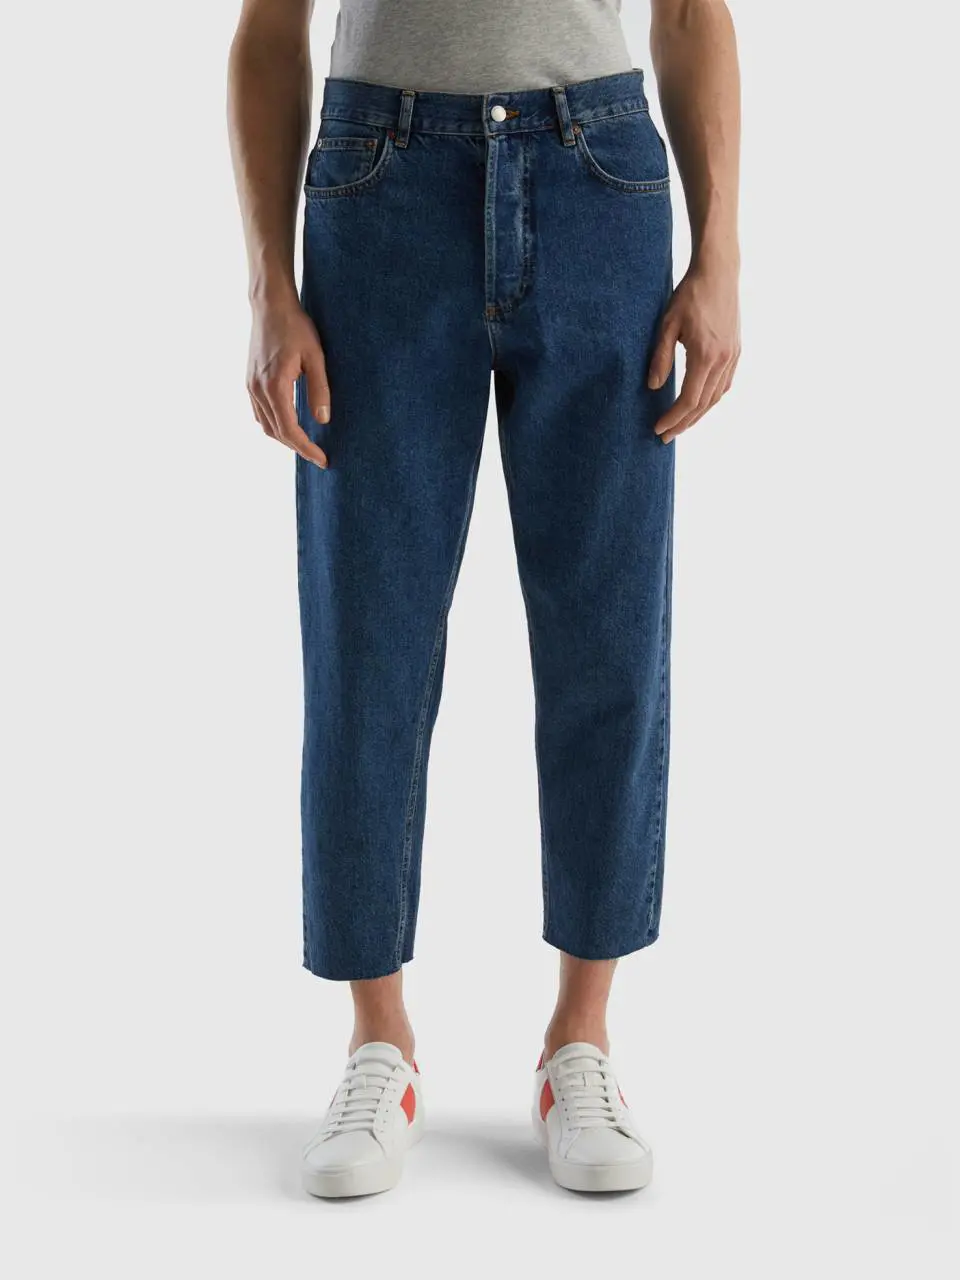 Benetton cropped loose fit jeans. 1